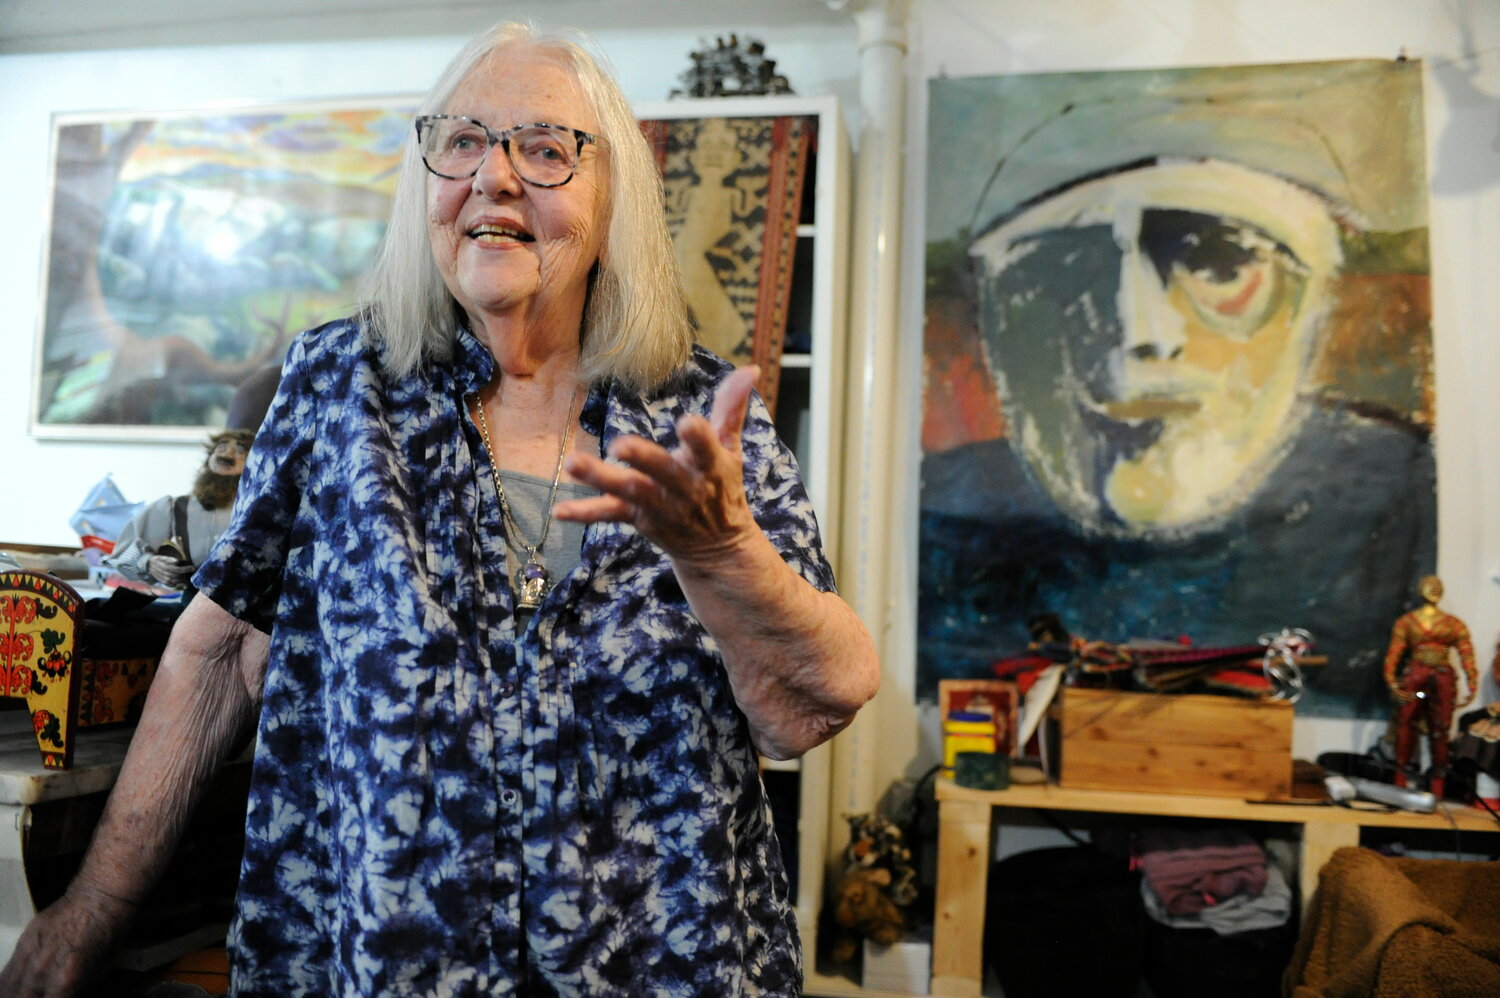 Nancy Wells, a multi-faceted artist who works in a variety of mediums, discusses the creative process in her studio...